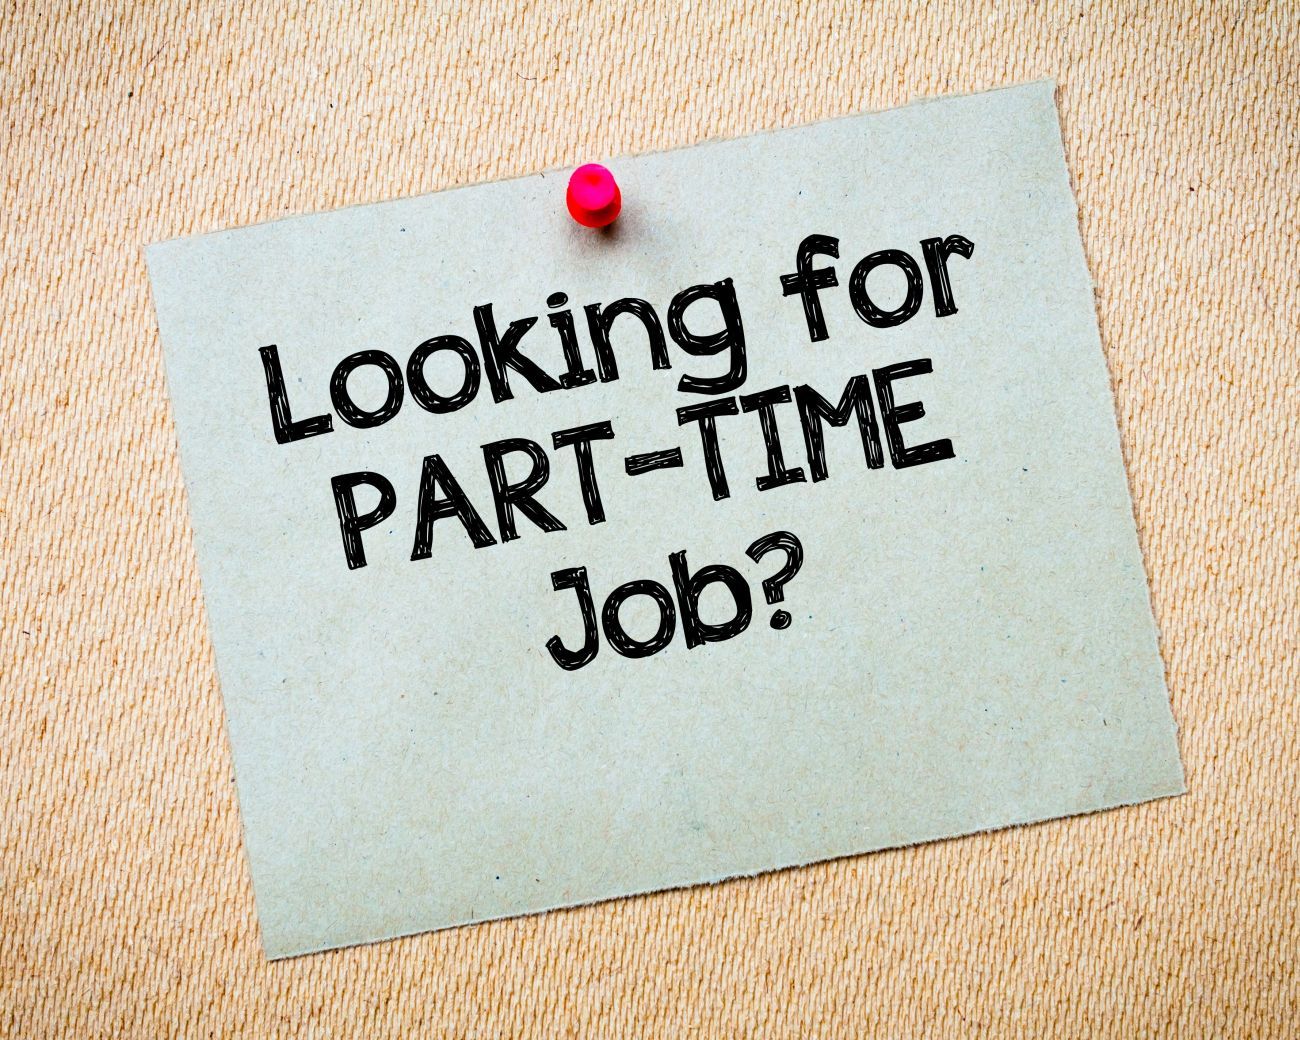 Part time evening jobs in warrington cheshire